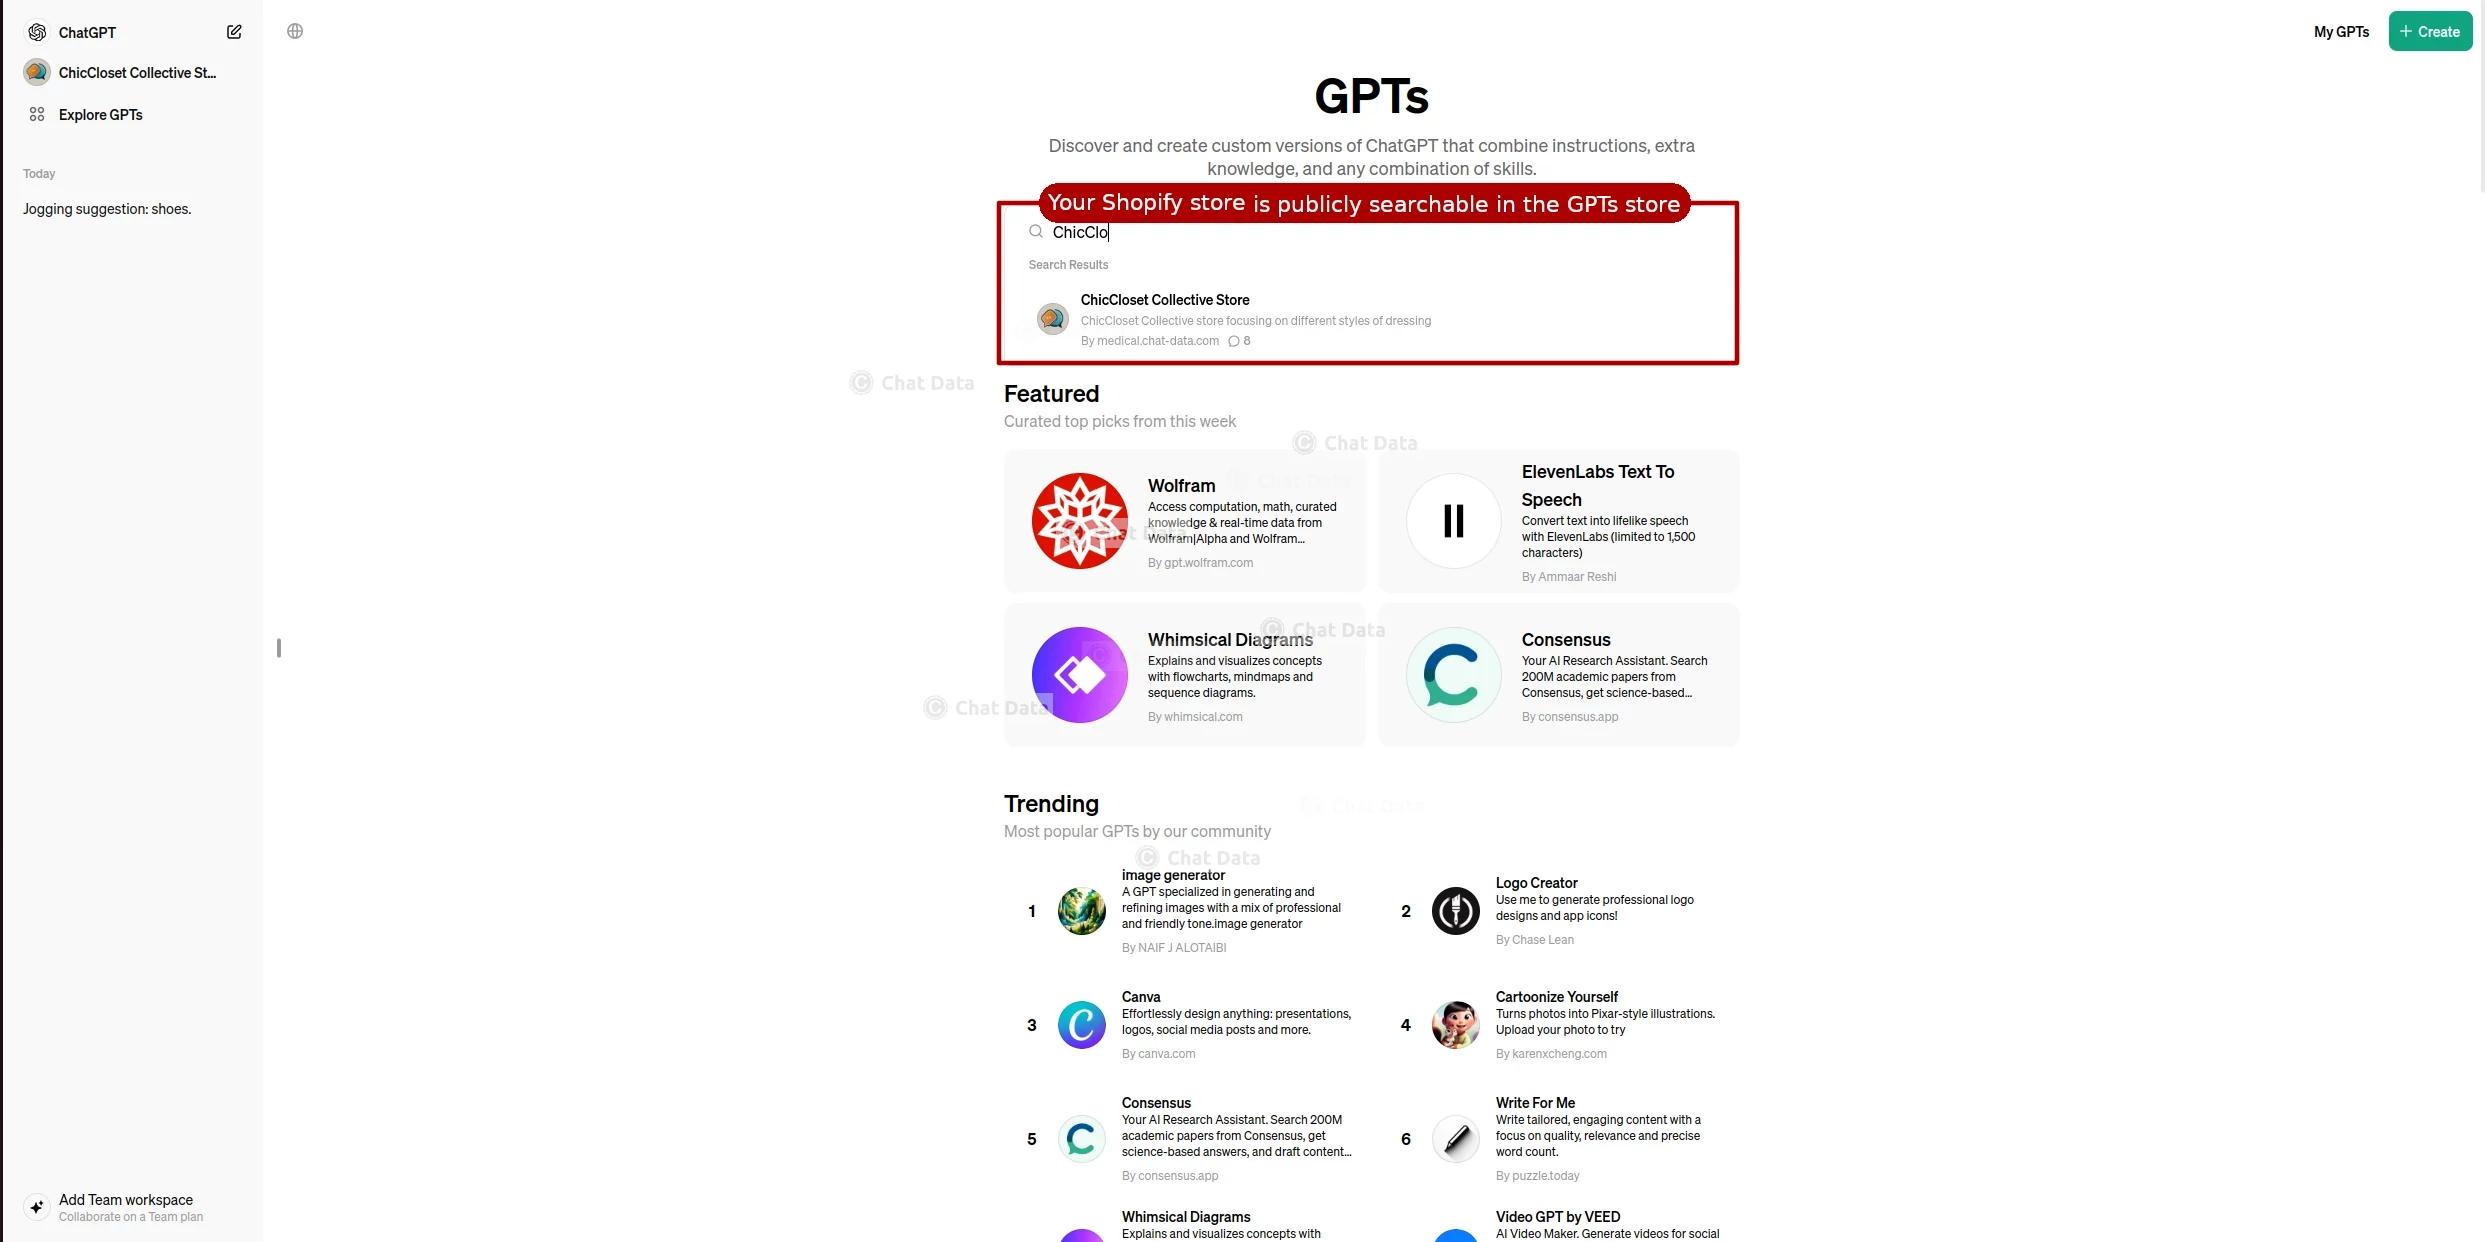 WooCommerce Store Show In GPTs Store